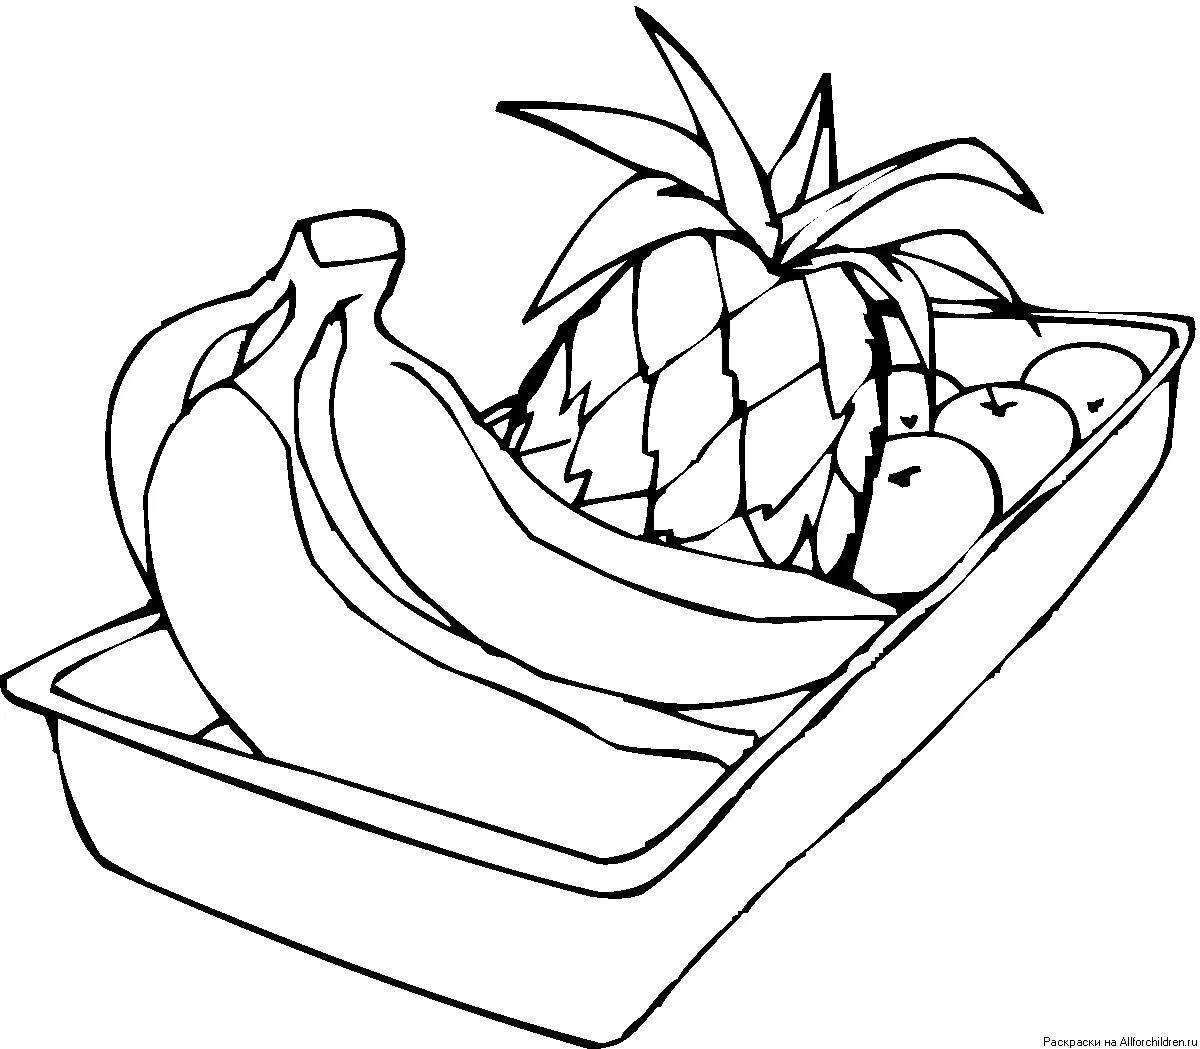 Adorable fruit plate coloring page